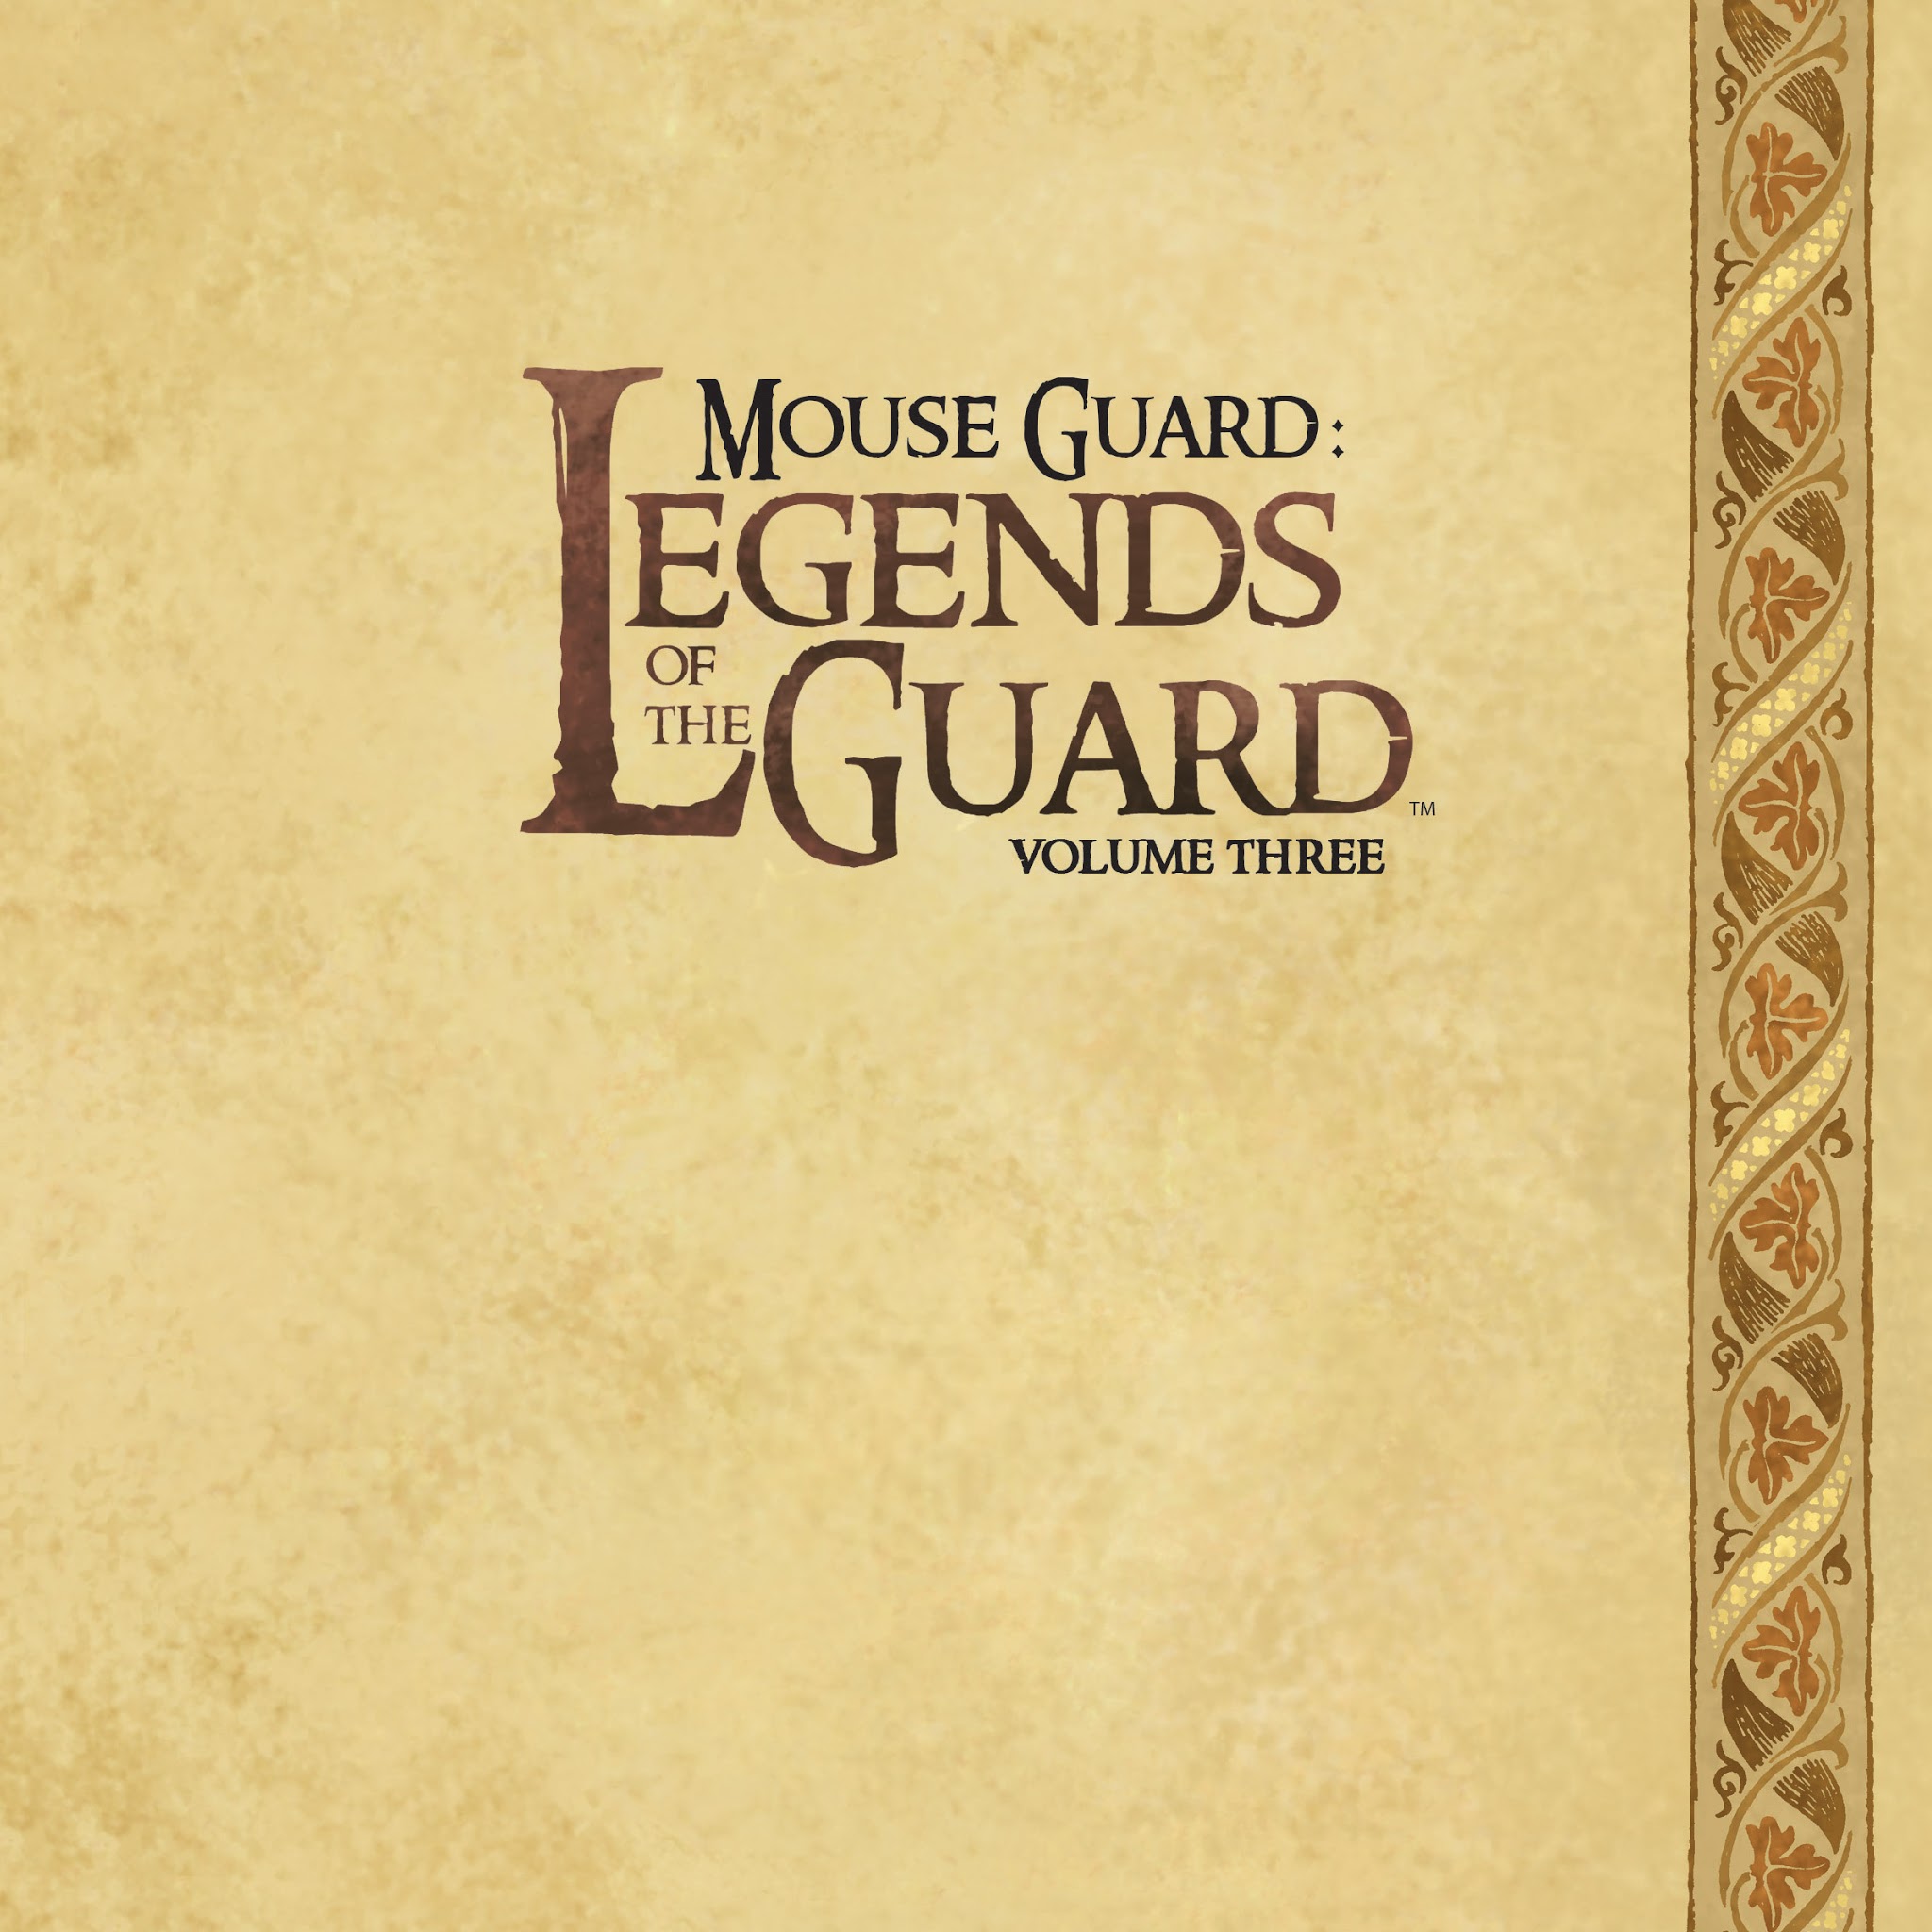 Read online Mouse Guard: Legends of the Guard Volume Three comic -  Issue # TPB - 6